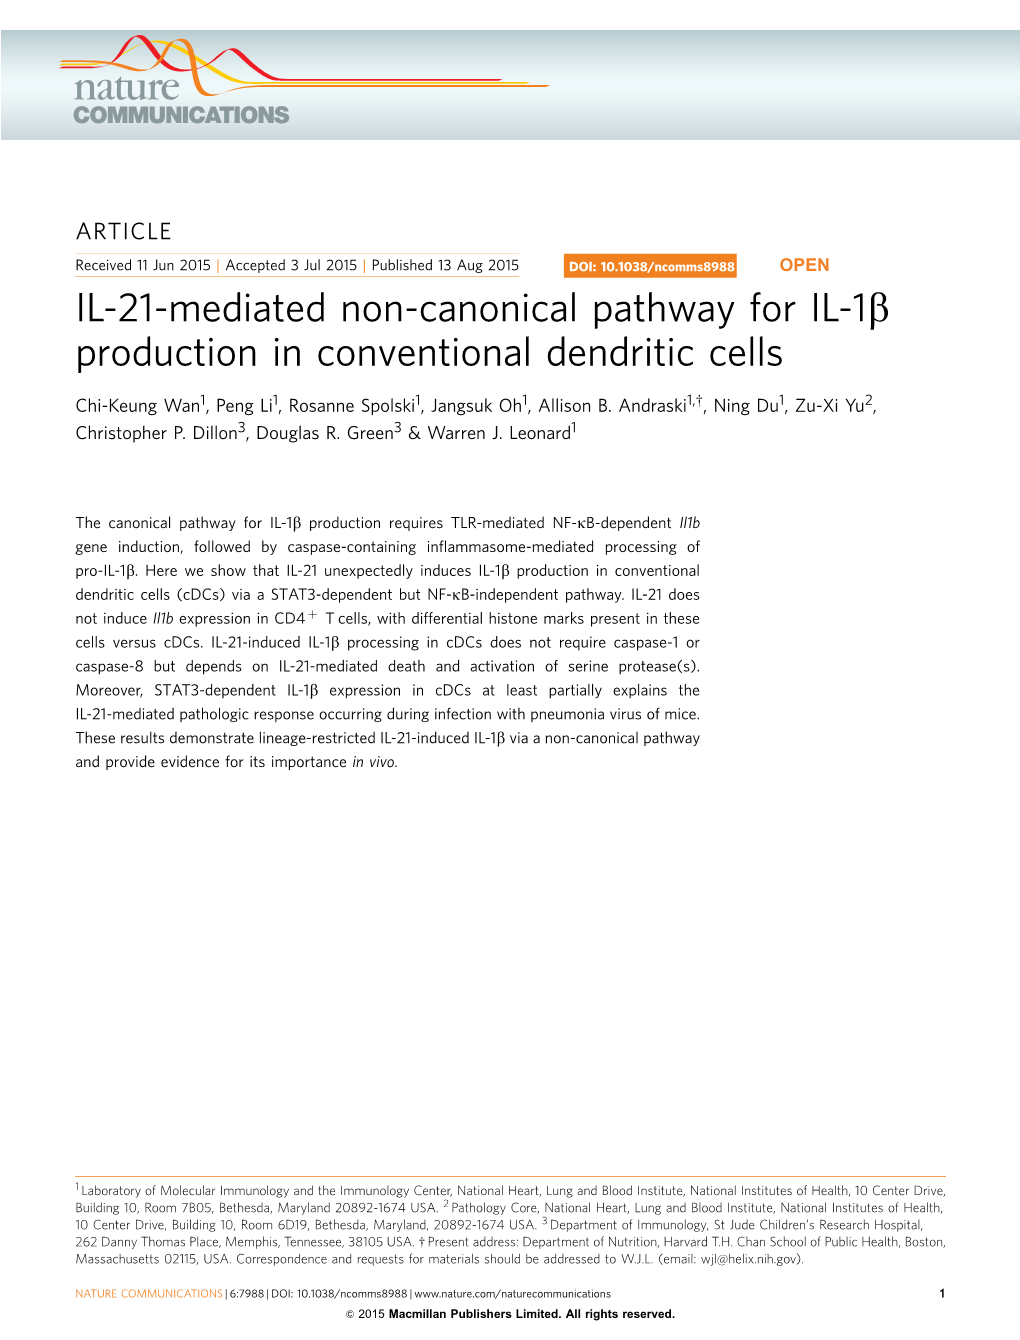 Production in Conventional Dendritic Cells